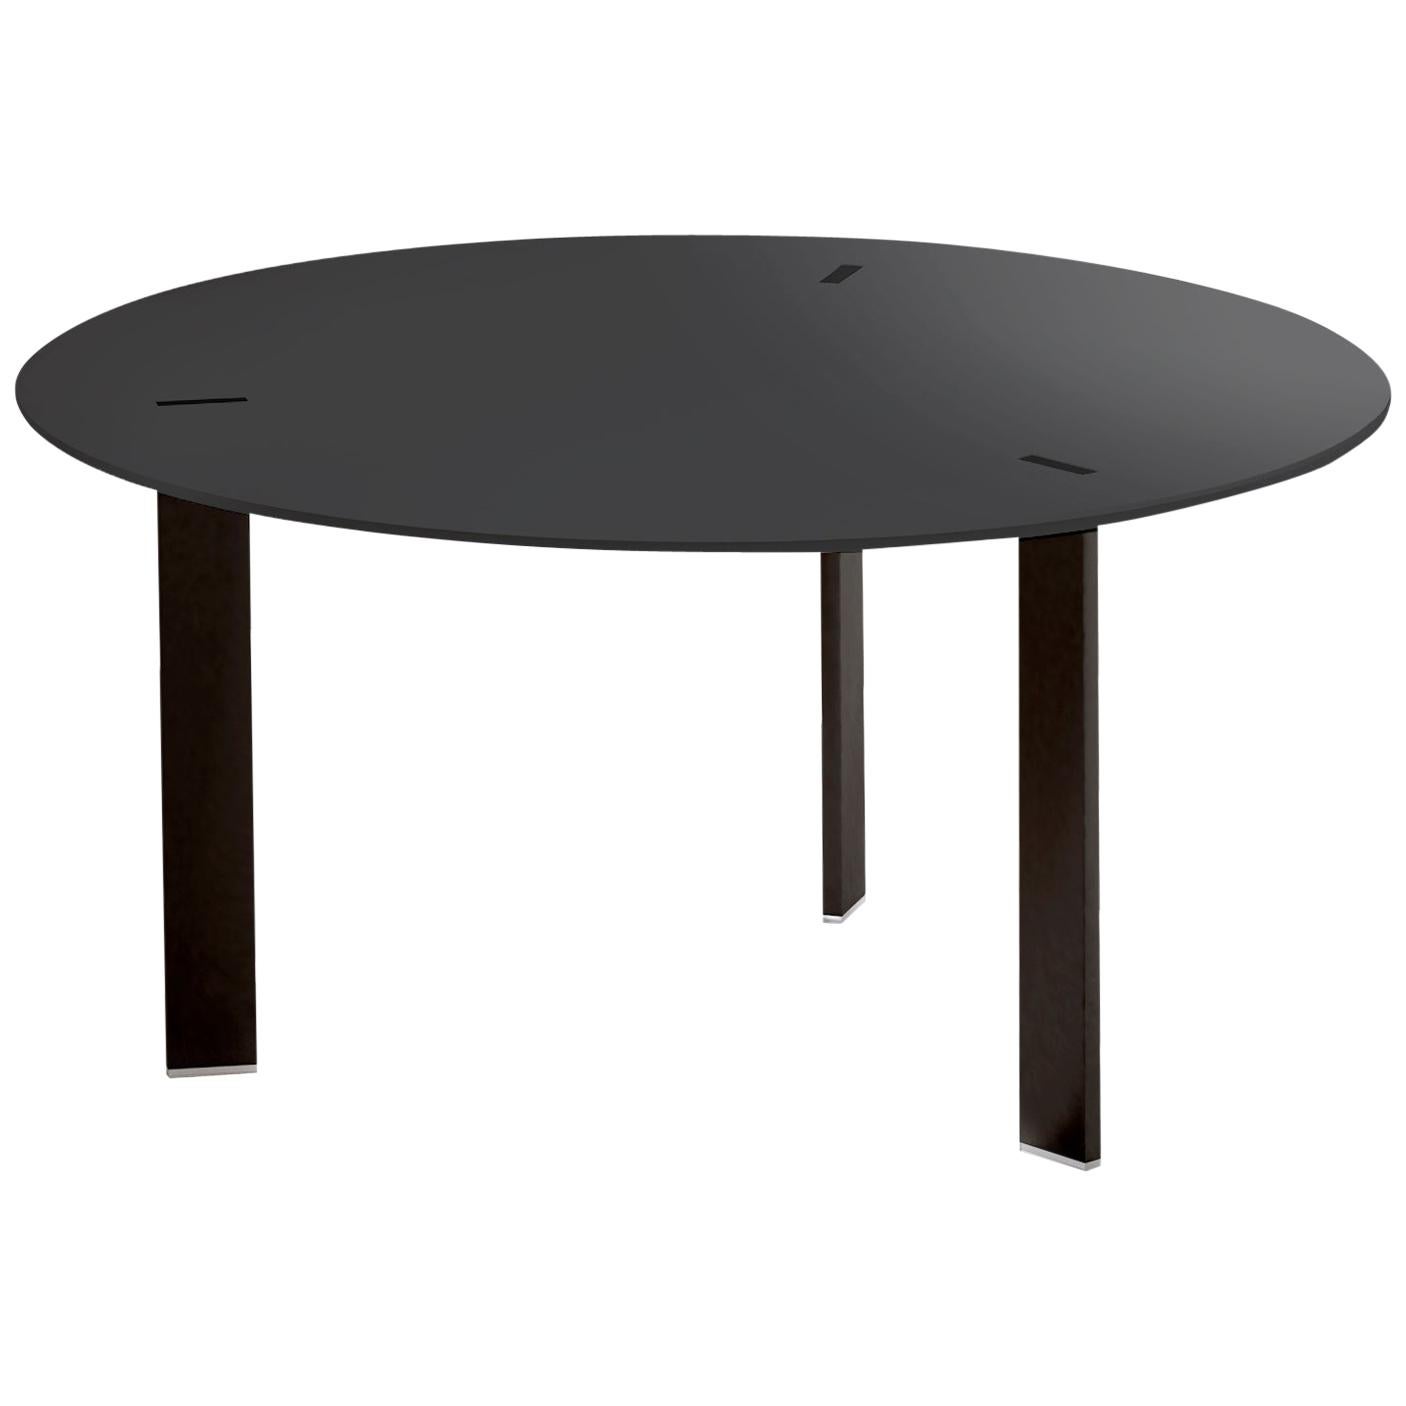 Viccarbe Ryutaro Coffee Table, Black Finish Diamter 23 inches by Víctor Carrasco For Sale